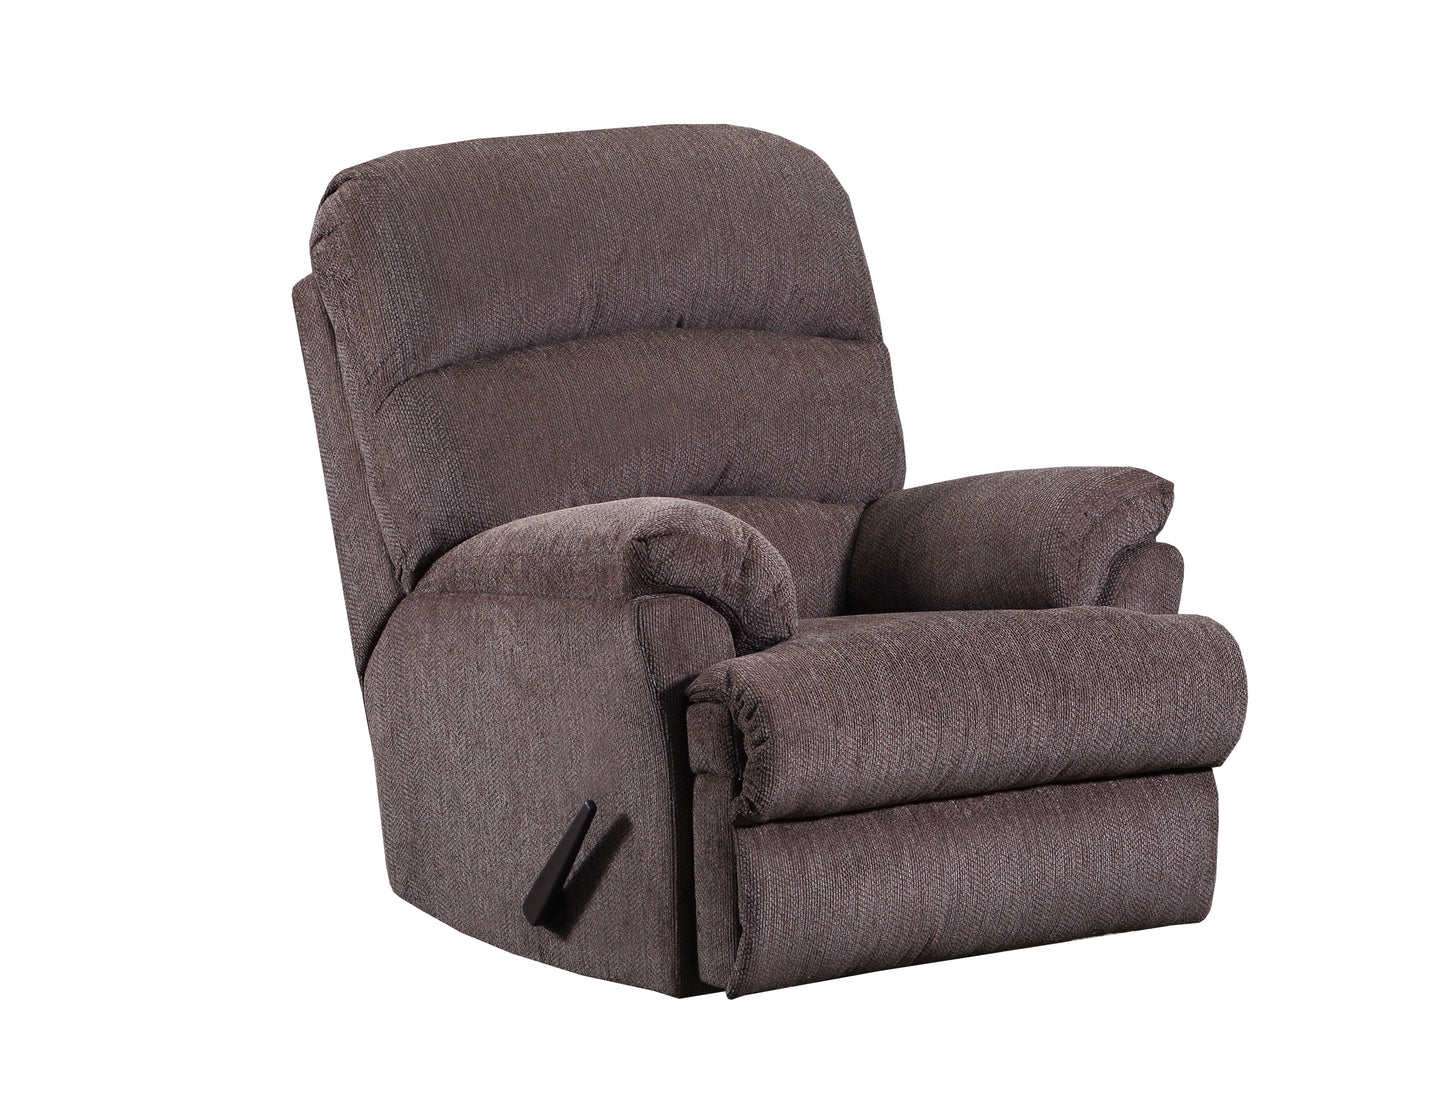 Darby Brown Recliner